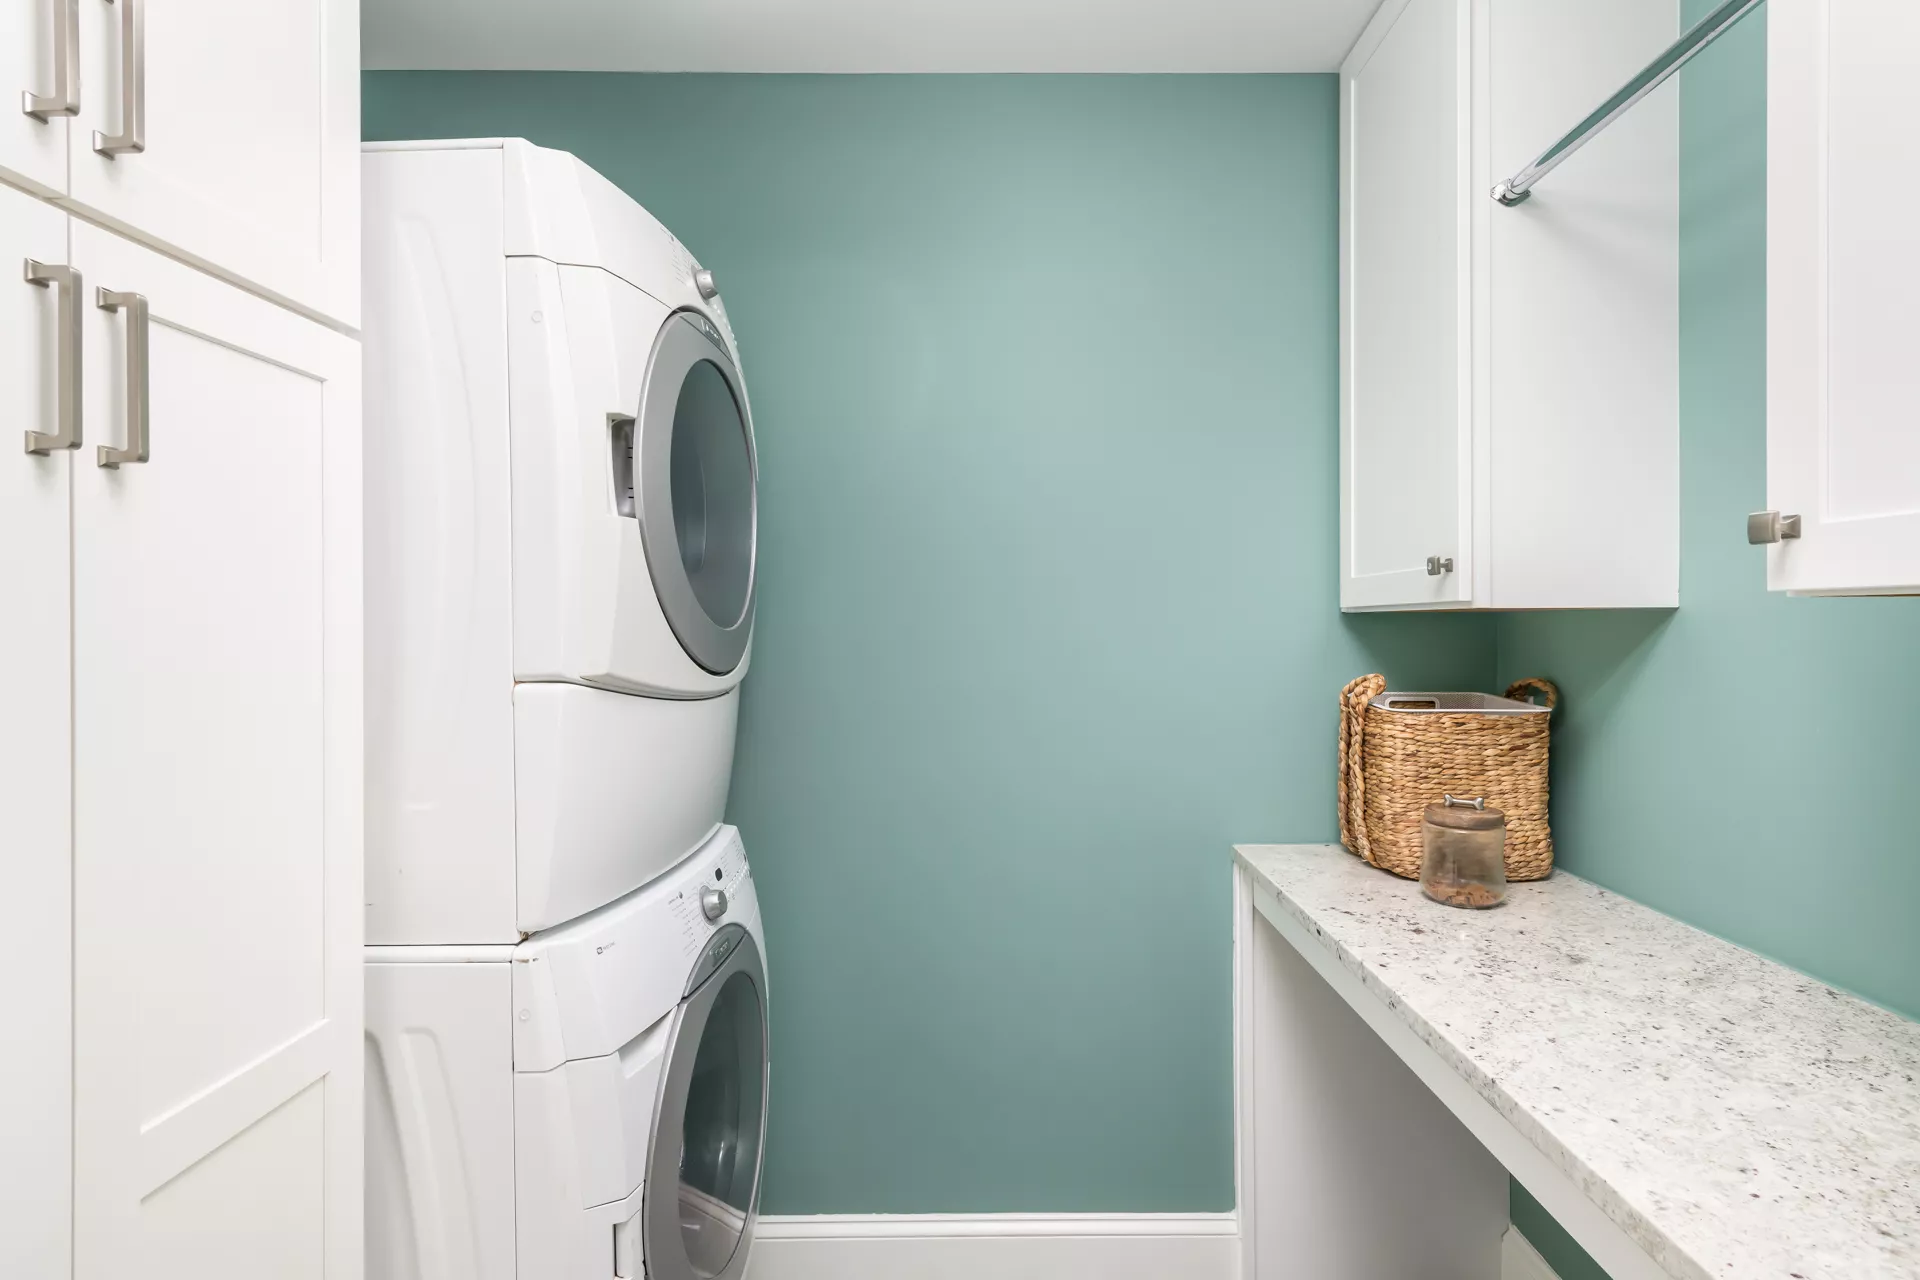 Renovated laundry room with marble counter and linen cabinets